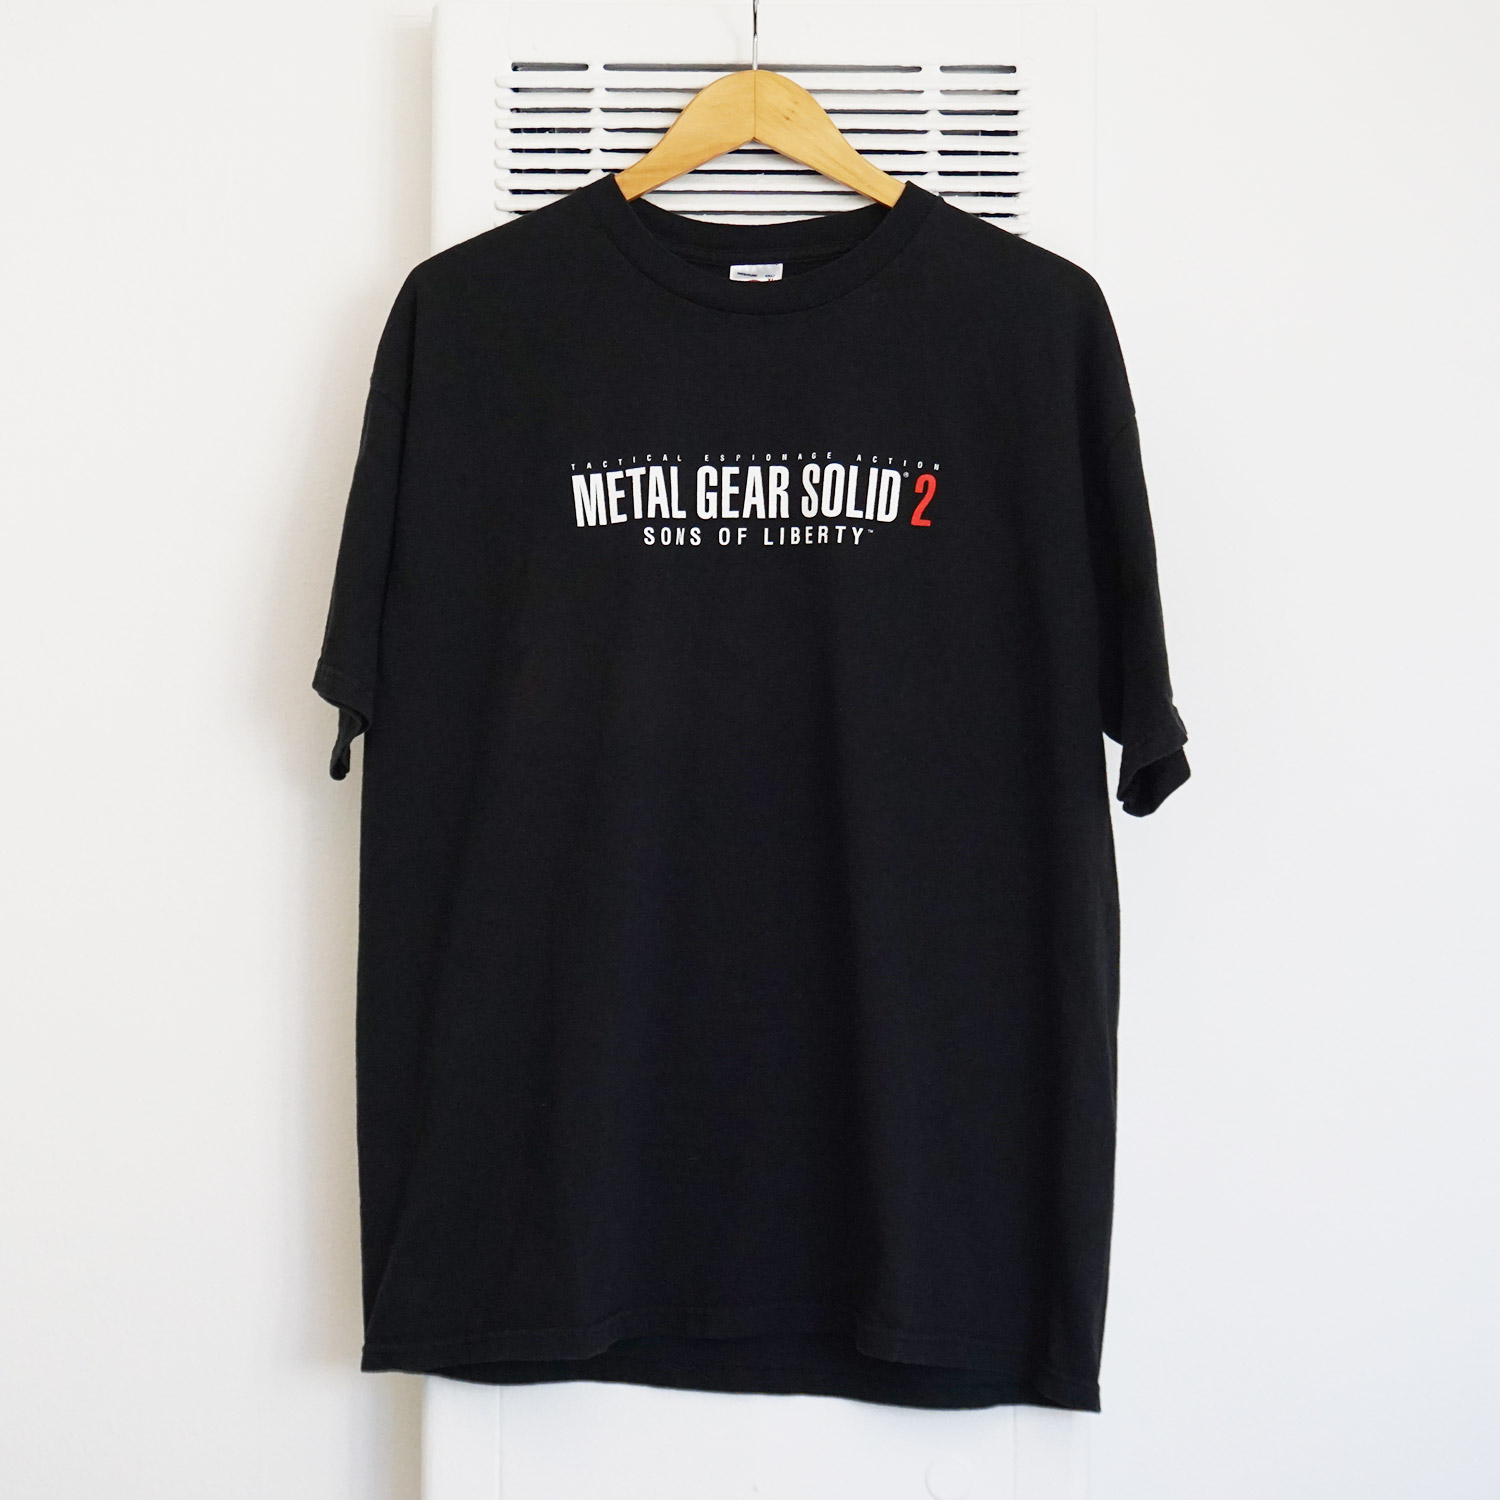 Metal Gear Solid 2: Sons of Liberty T-shirt